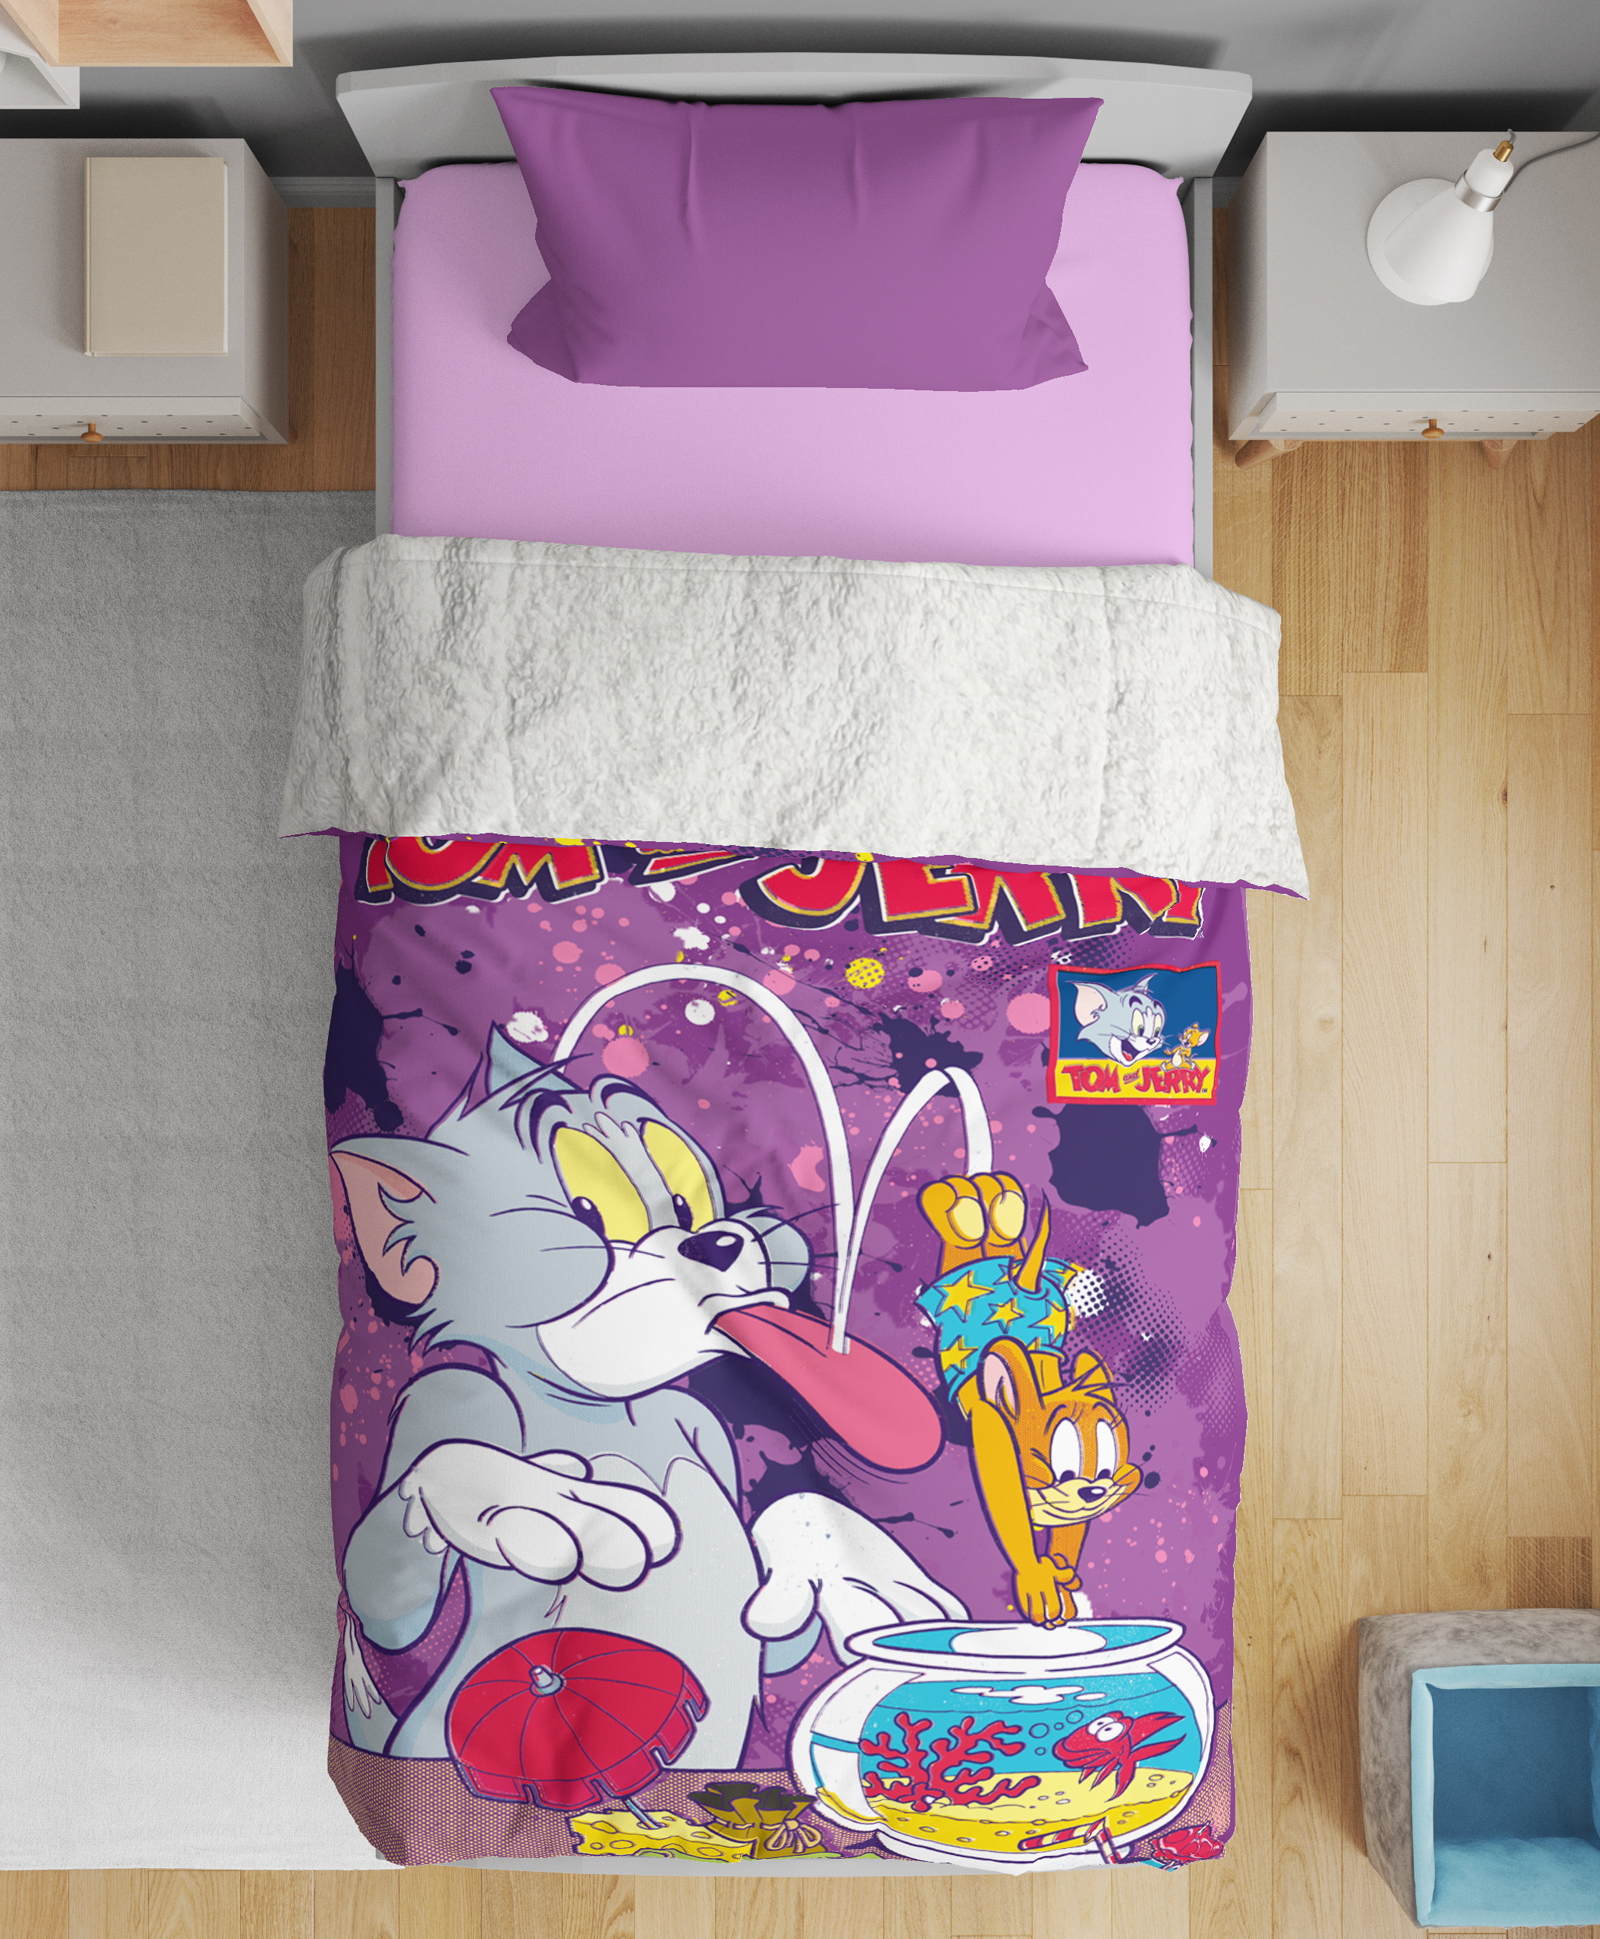 Sassoon Tom & Jerry Cartoon Printed Single Warm Blanket - Purple Online in  India, Buy at Best Price from  - 12920539